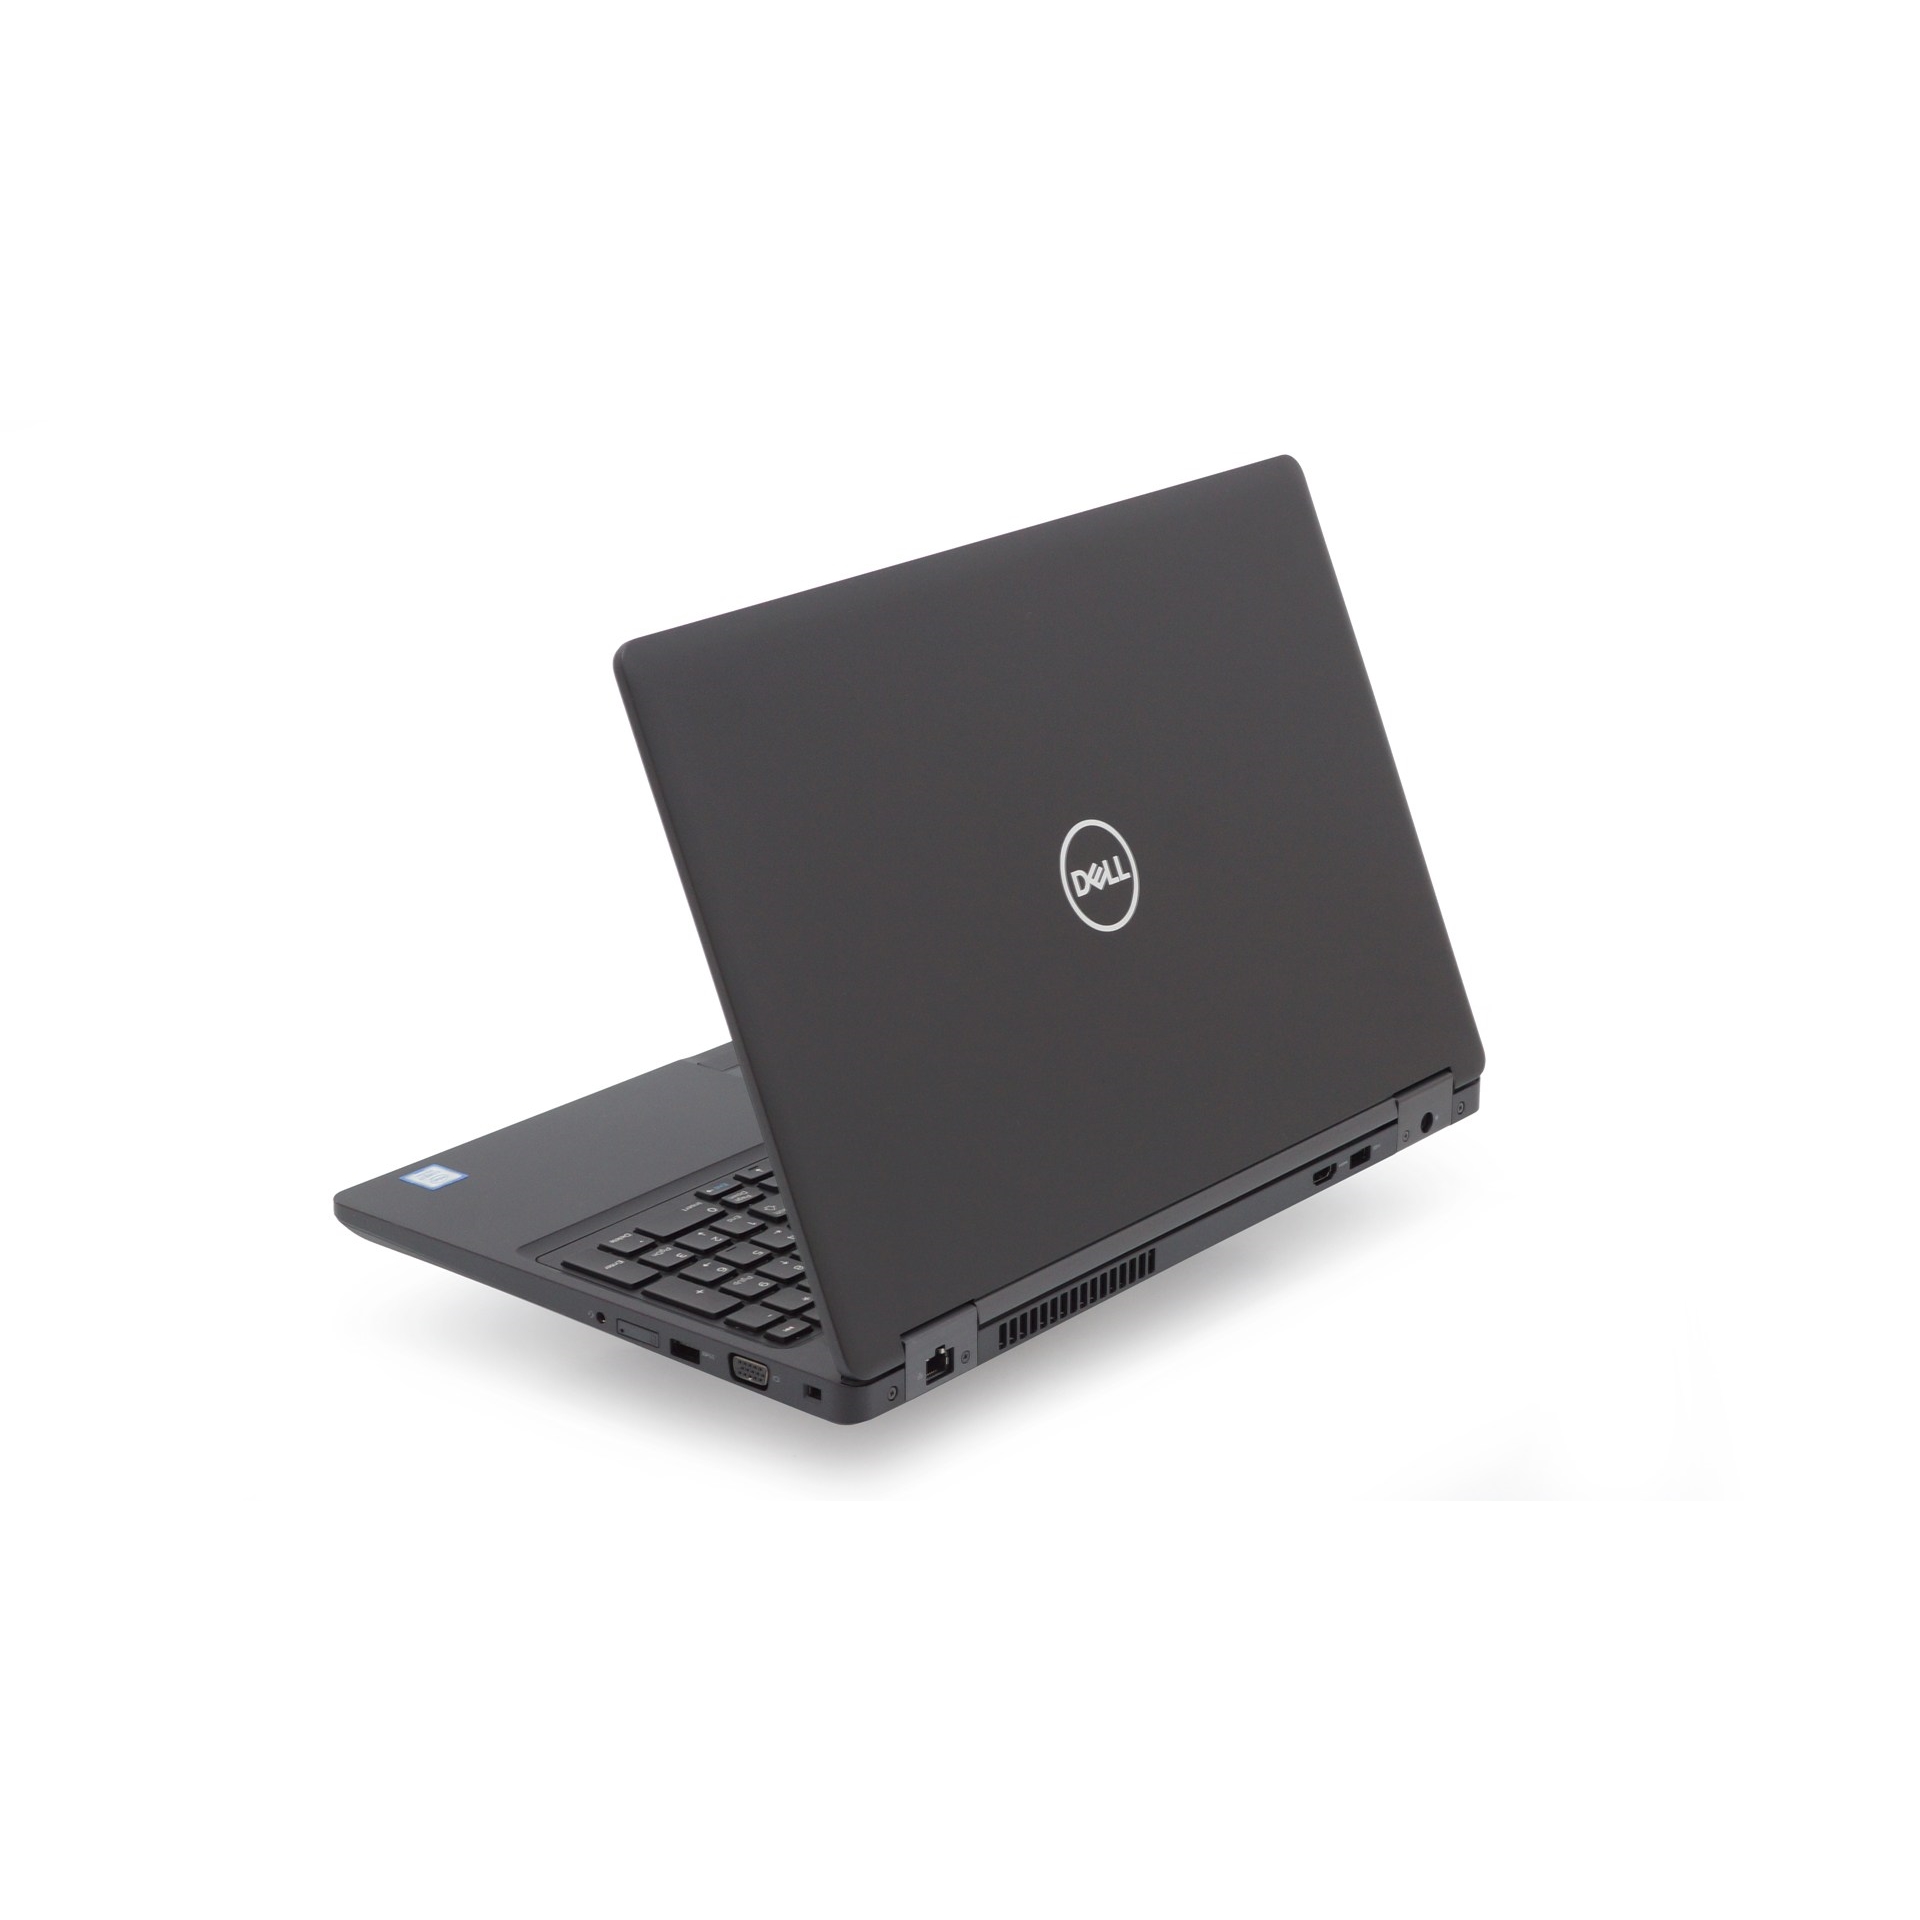 DELL LATITUDE 5590 N066L559015EMEA_U I5-8350U 8GB 256GB SSD O/B VGA 15.6" FHD LINUX NOTEBOOK